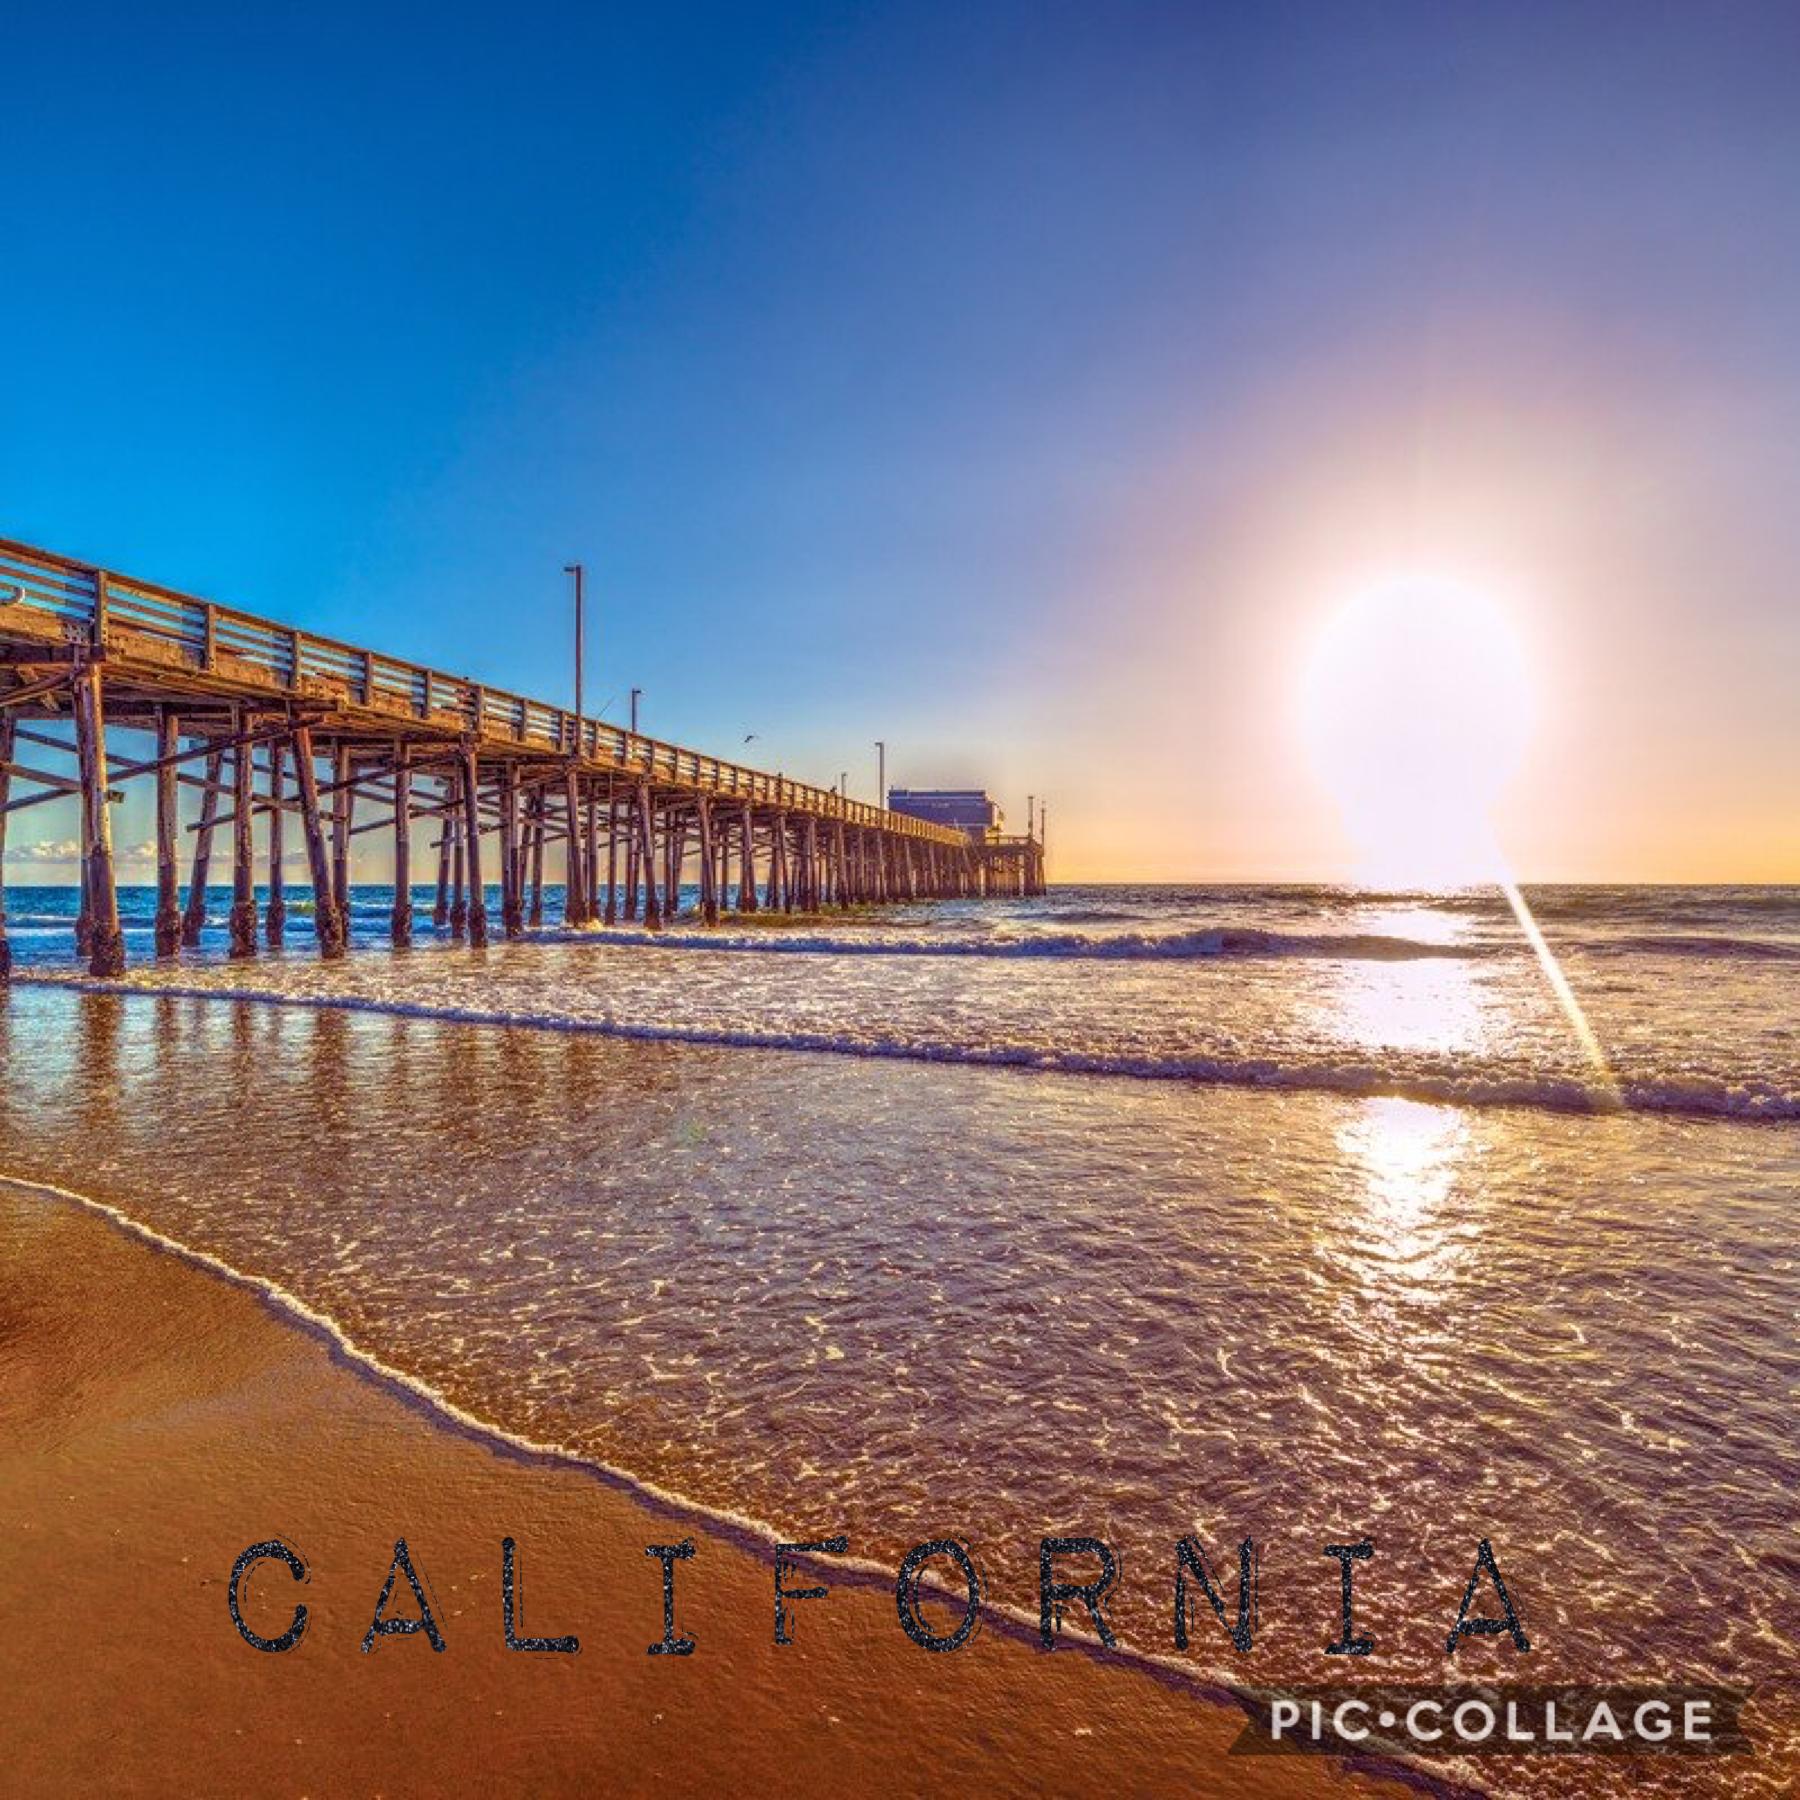 I would love to go to California 